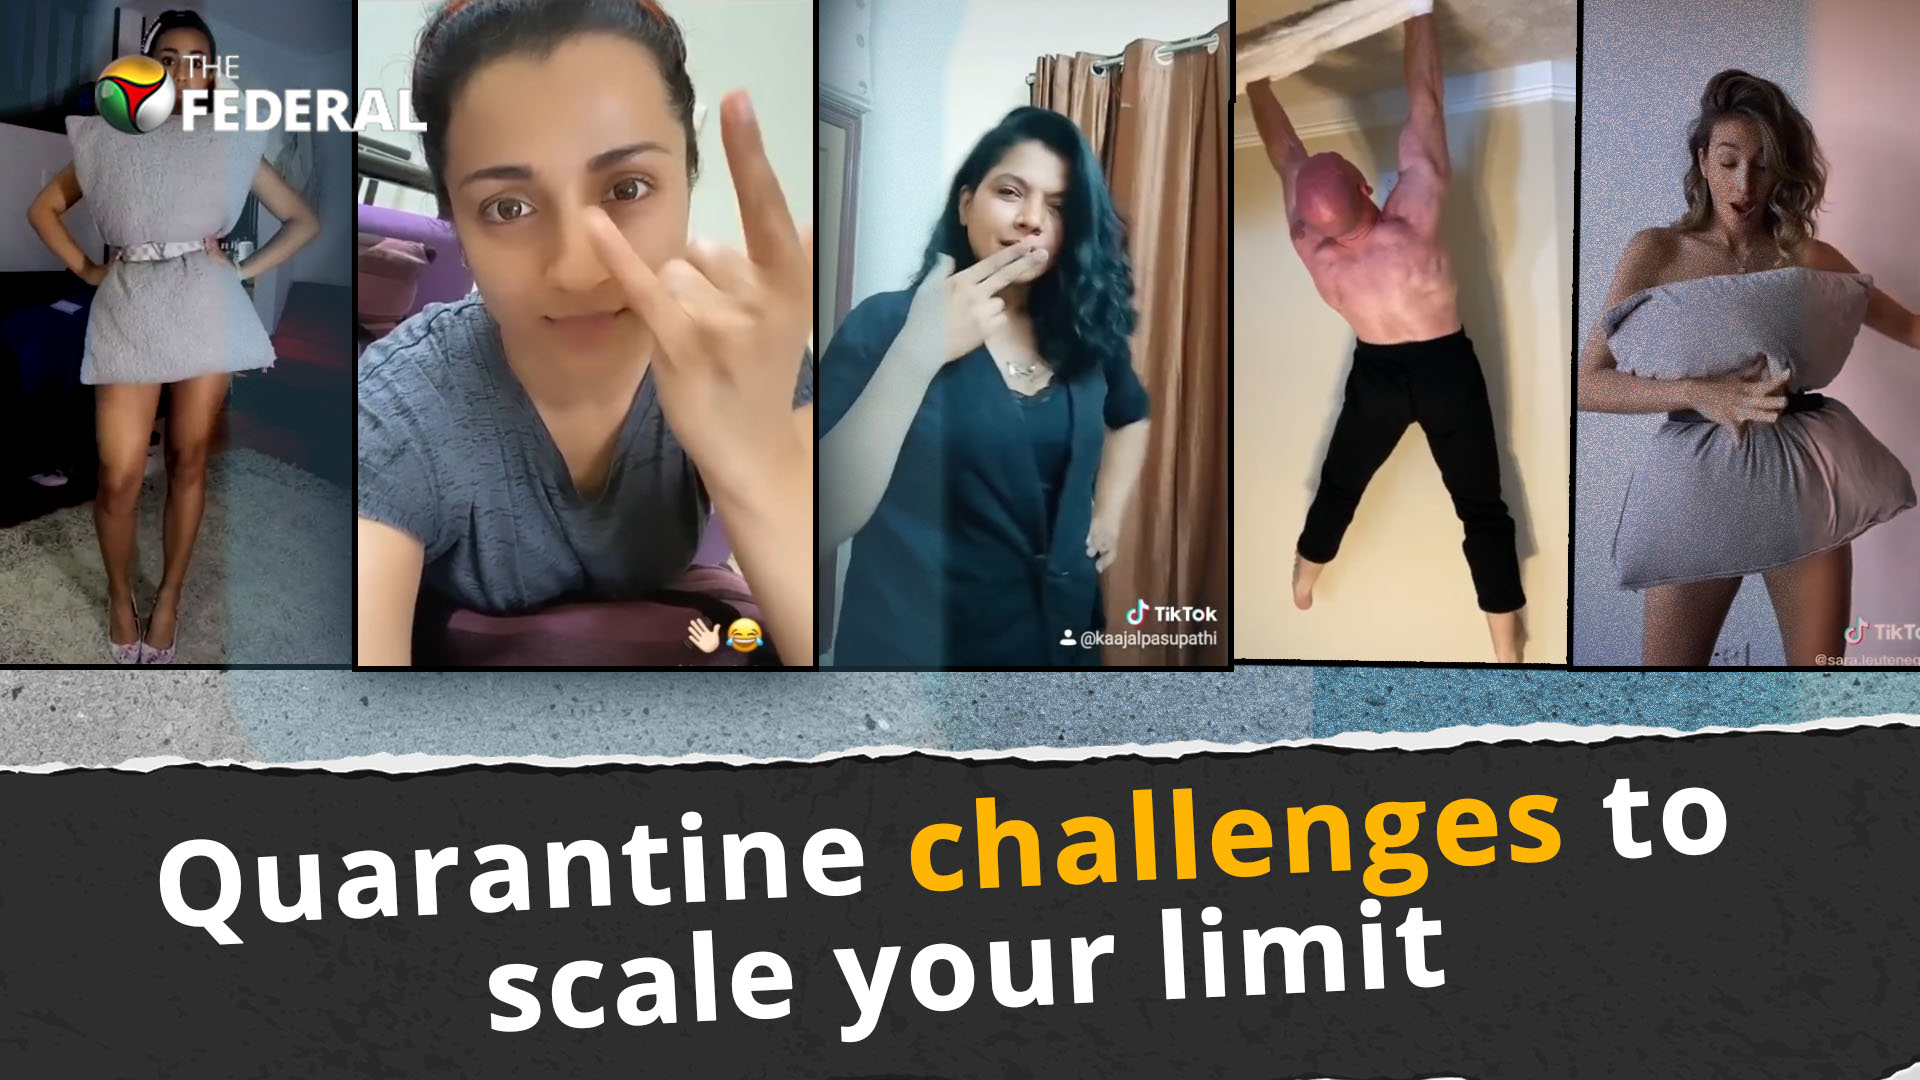 Quarantine challenges to scale your limit